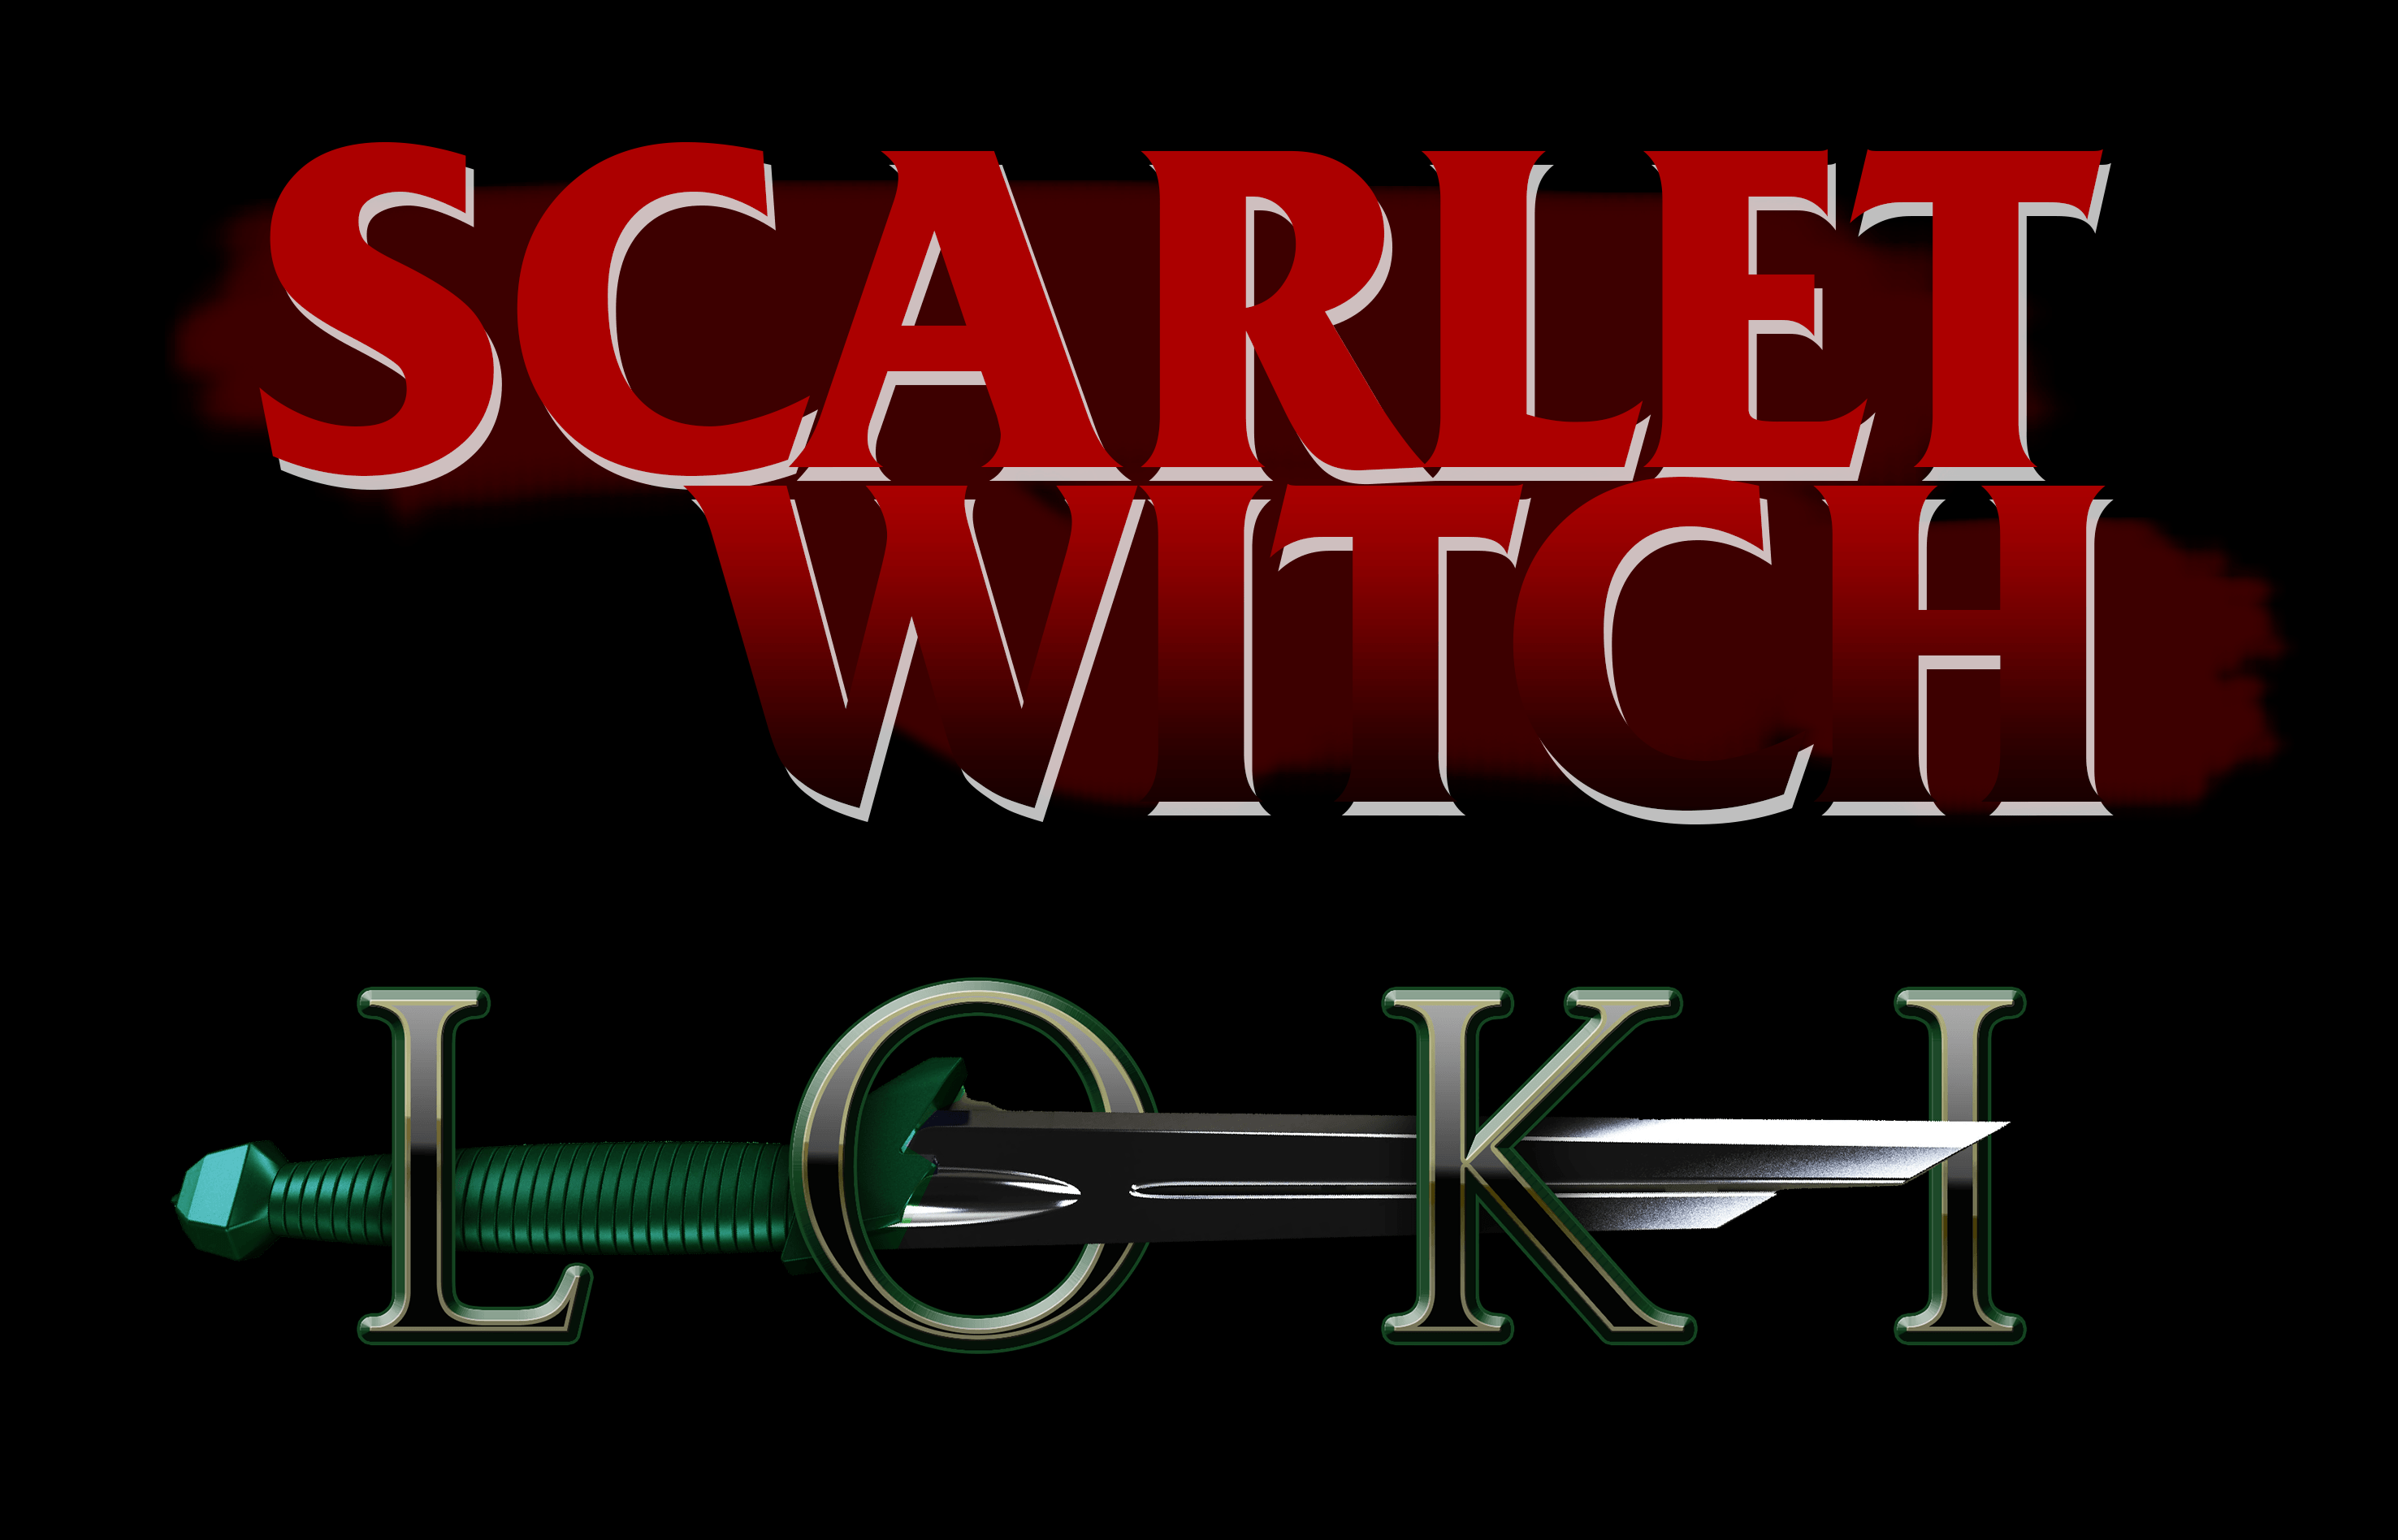 Loki Logo - Made up some logos for the Loki and Scarlet Witch shows! : marvelstudios